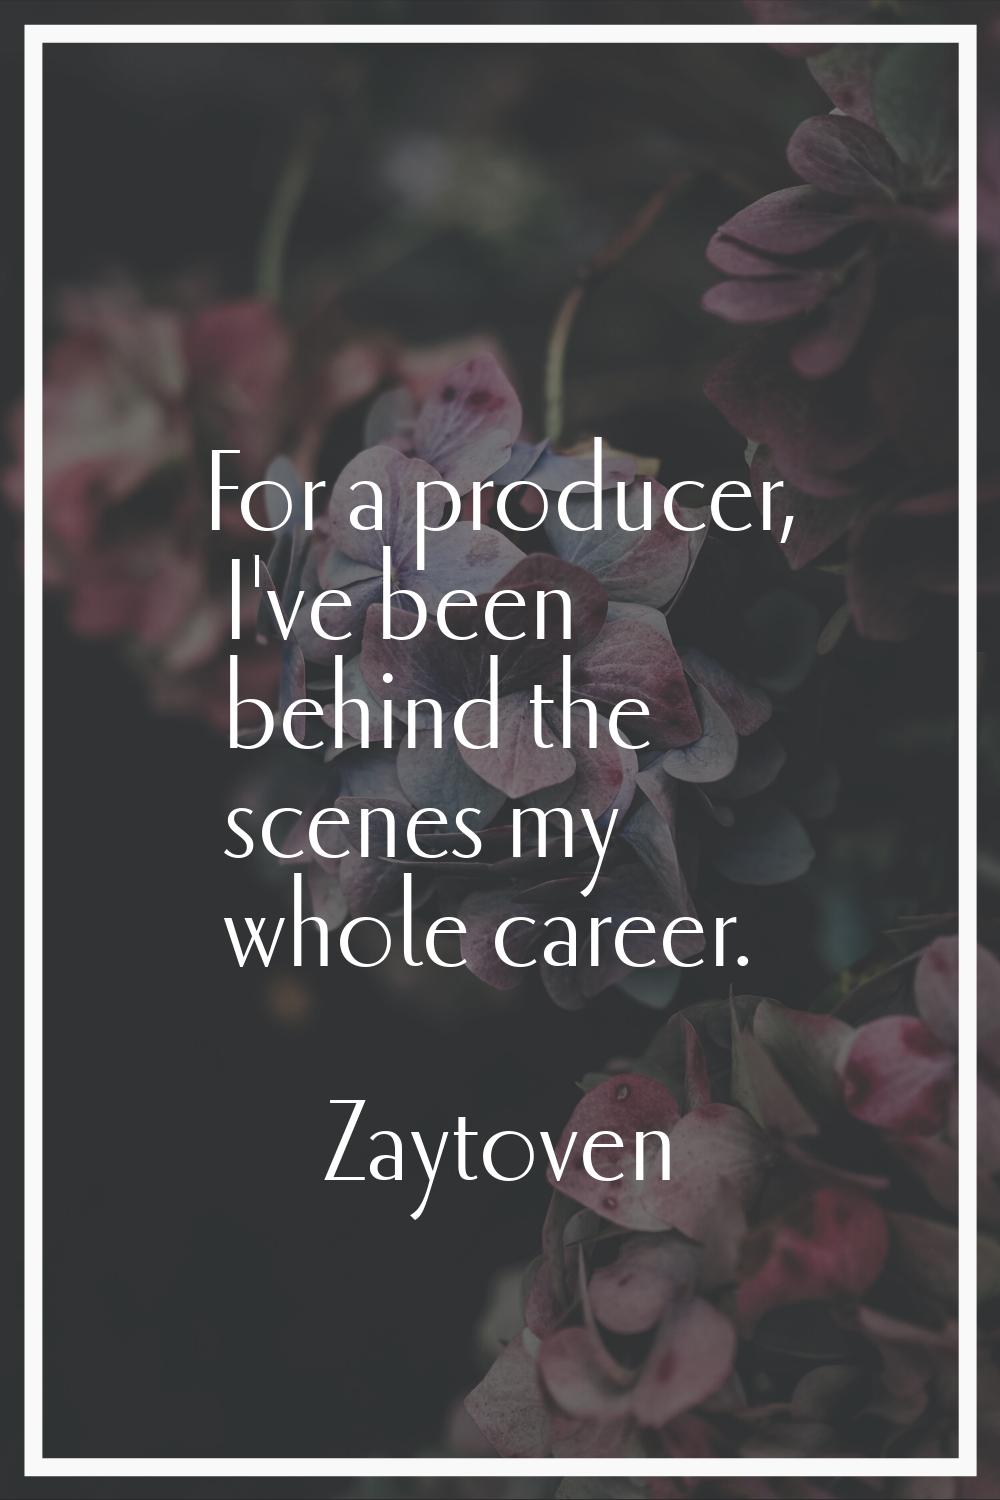 For a producer, I've been behind the scenes my whole career.